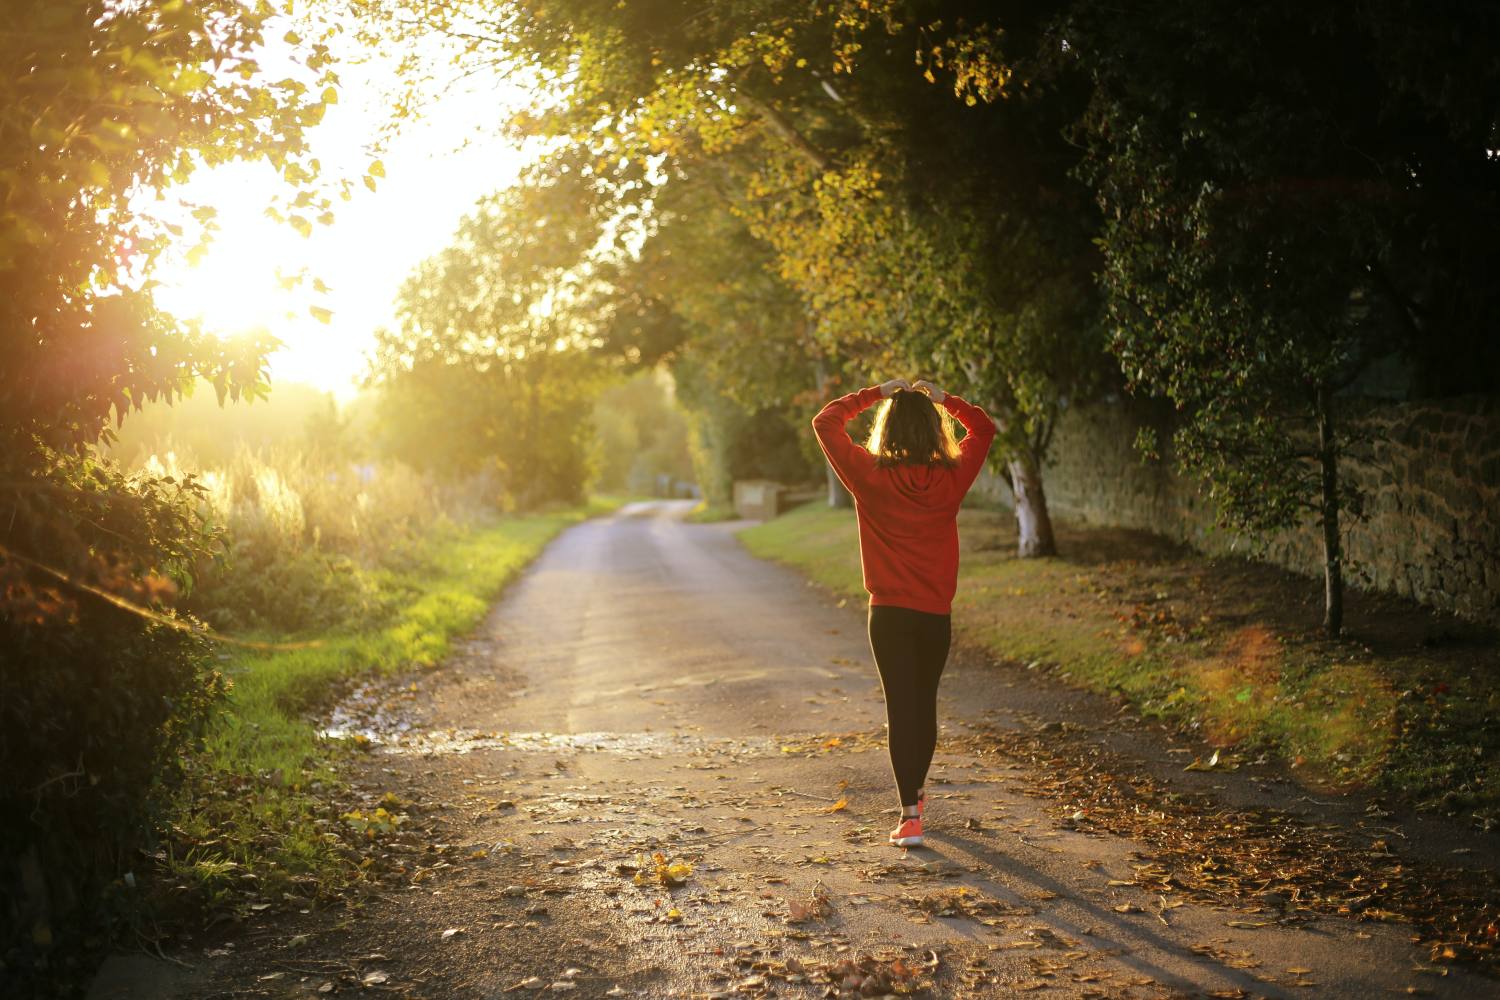 Blonde-haired woman with back to camera in Herron Apparel running pants and jacket looking into the morning sun on country lane.